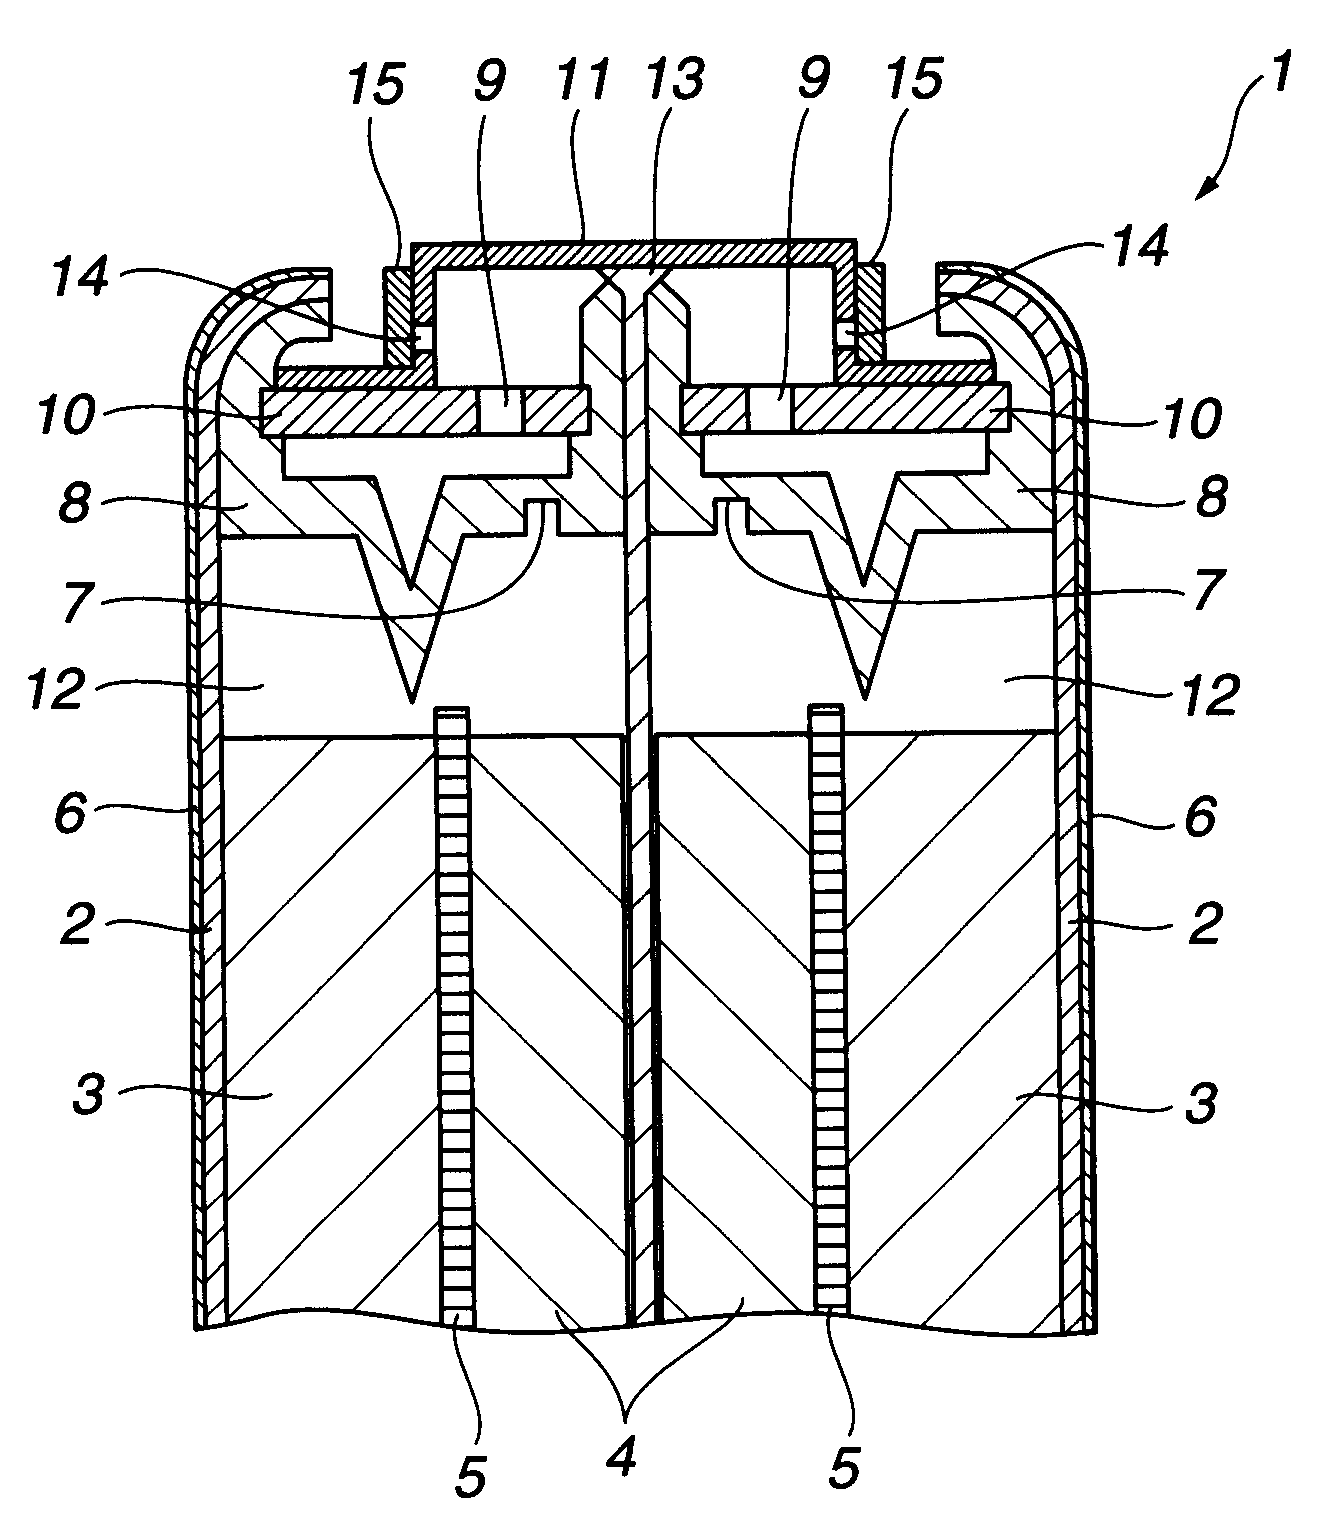 Battery with a sheathing member to prevent leakage of electrolytic solution